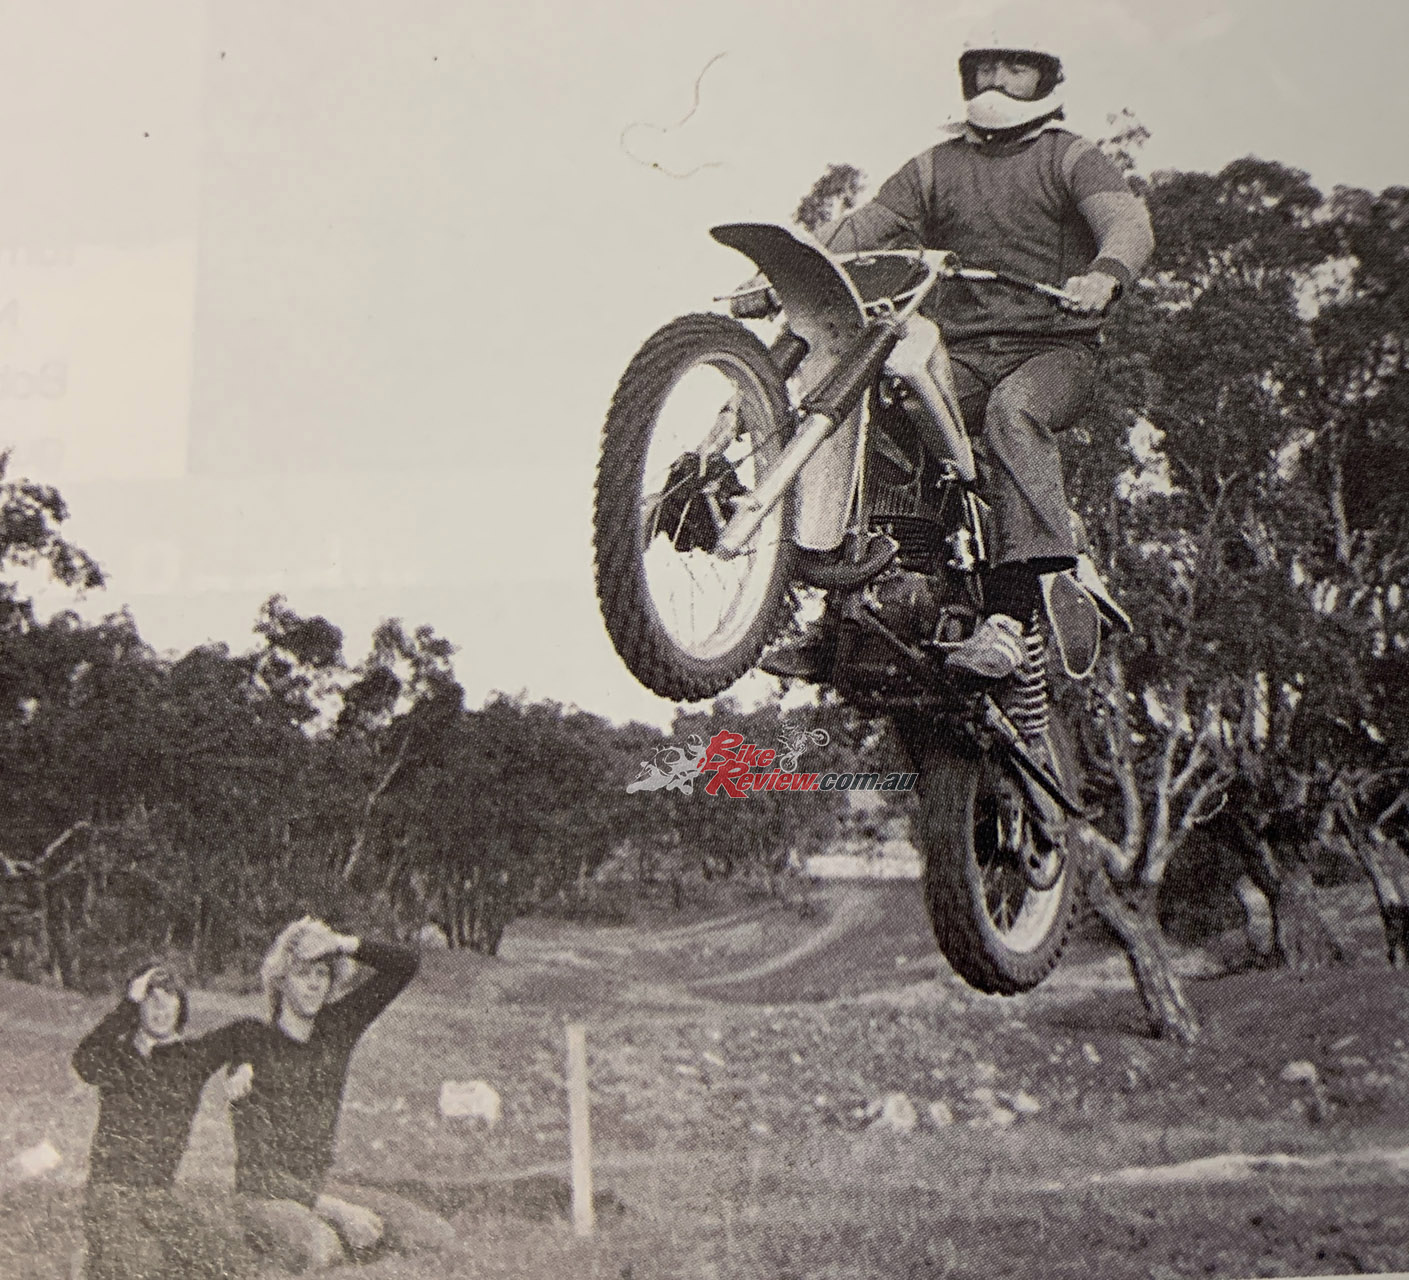 "'Magee continued to ride that YZ until he was 17. The usual routine was, get up and have breakfast, ride the YZ, have another breakfast and then go to school. Come home and ride the YZ until it was too dark."